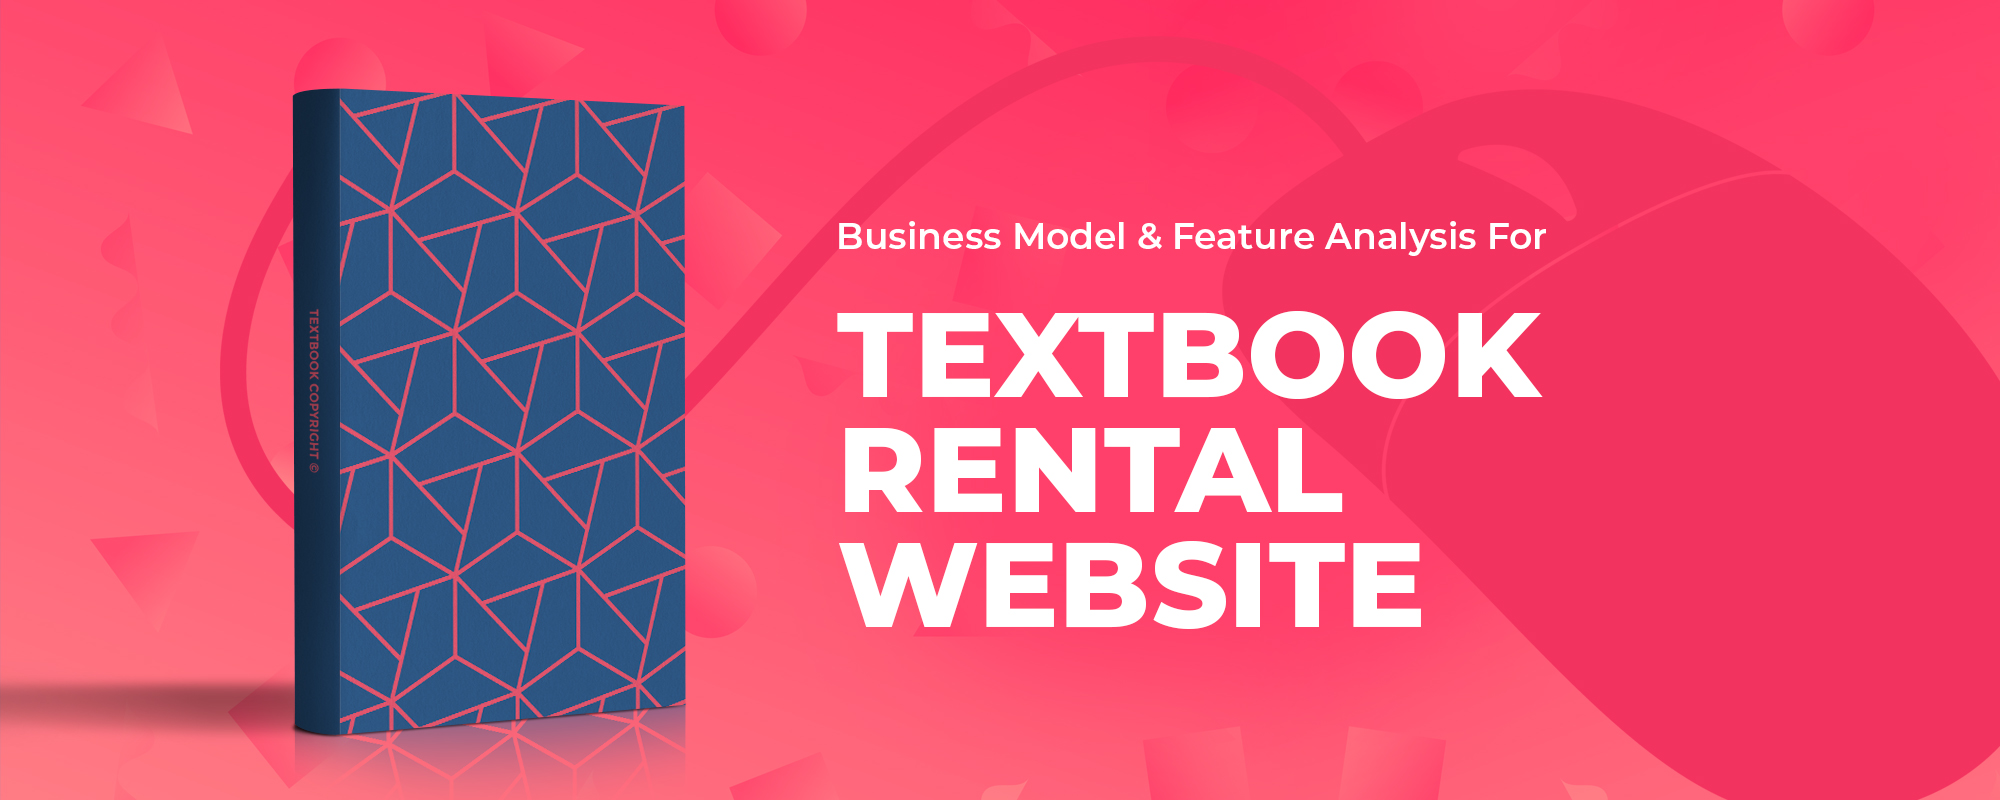 Build a Textbook Rental Website Around These eCommerce Features and Business Model